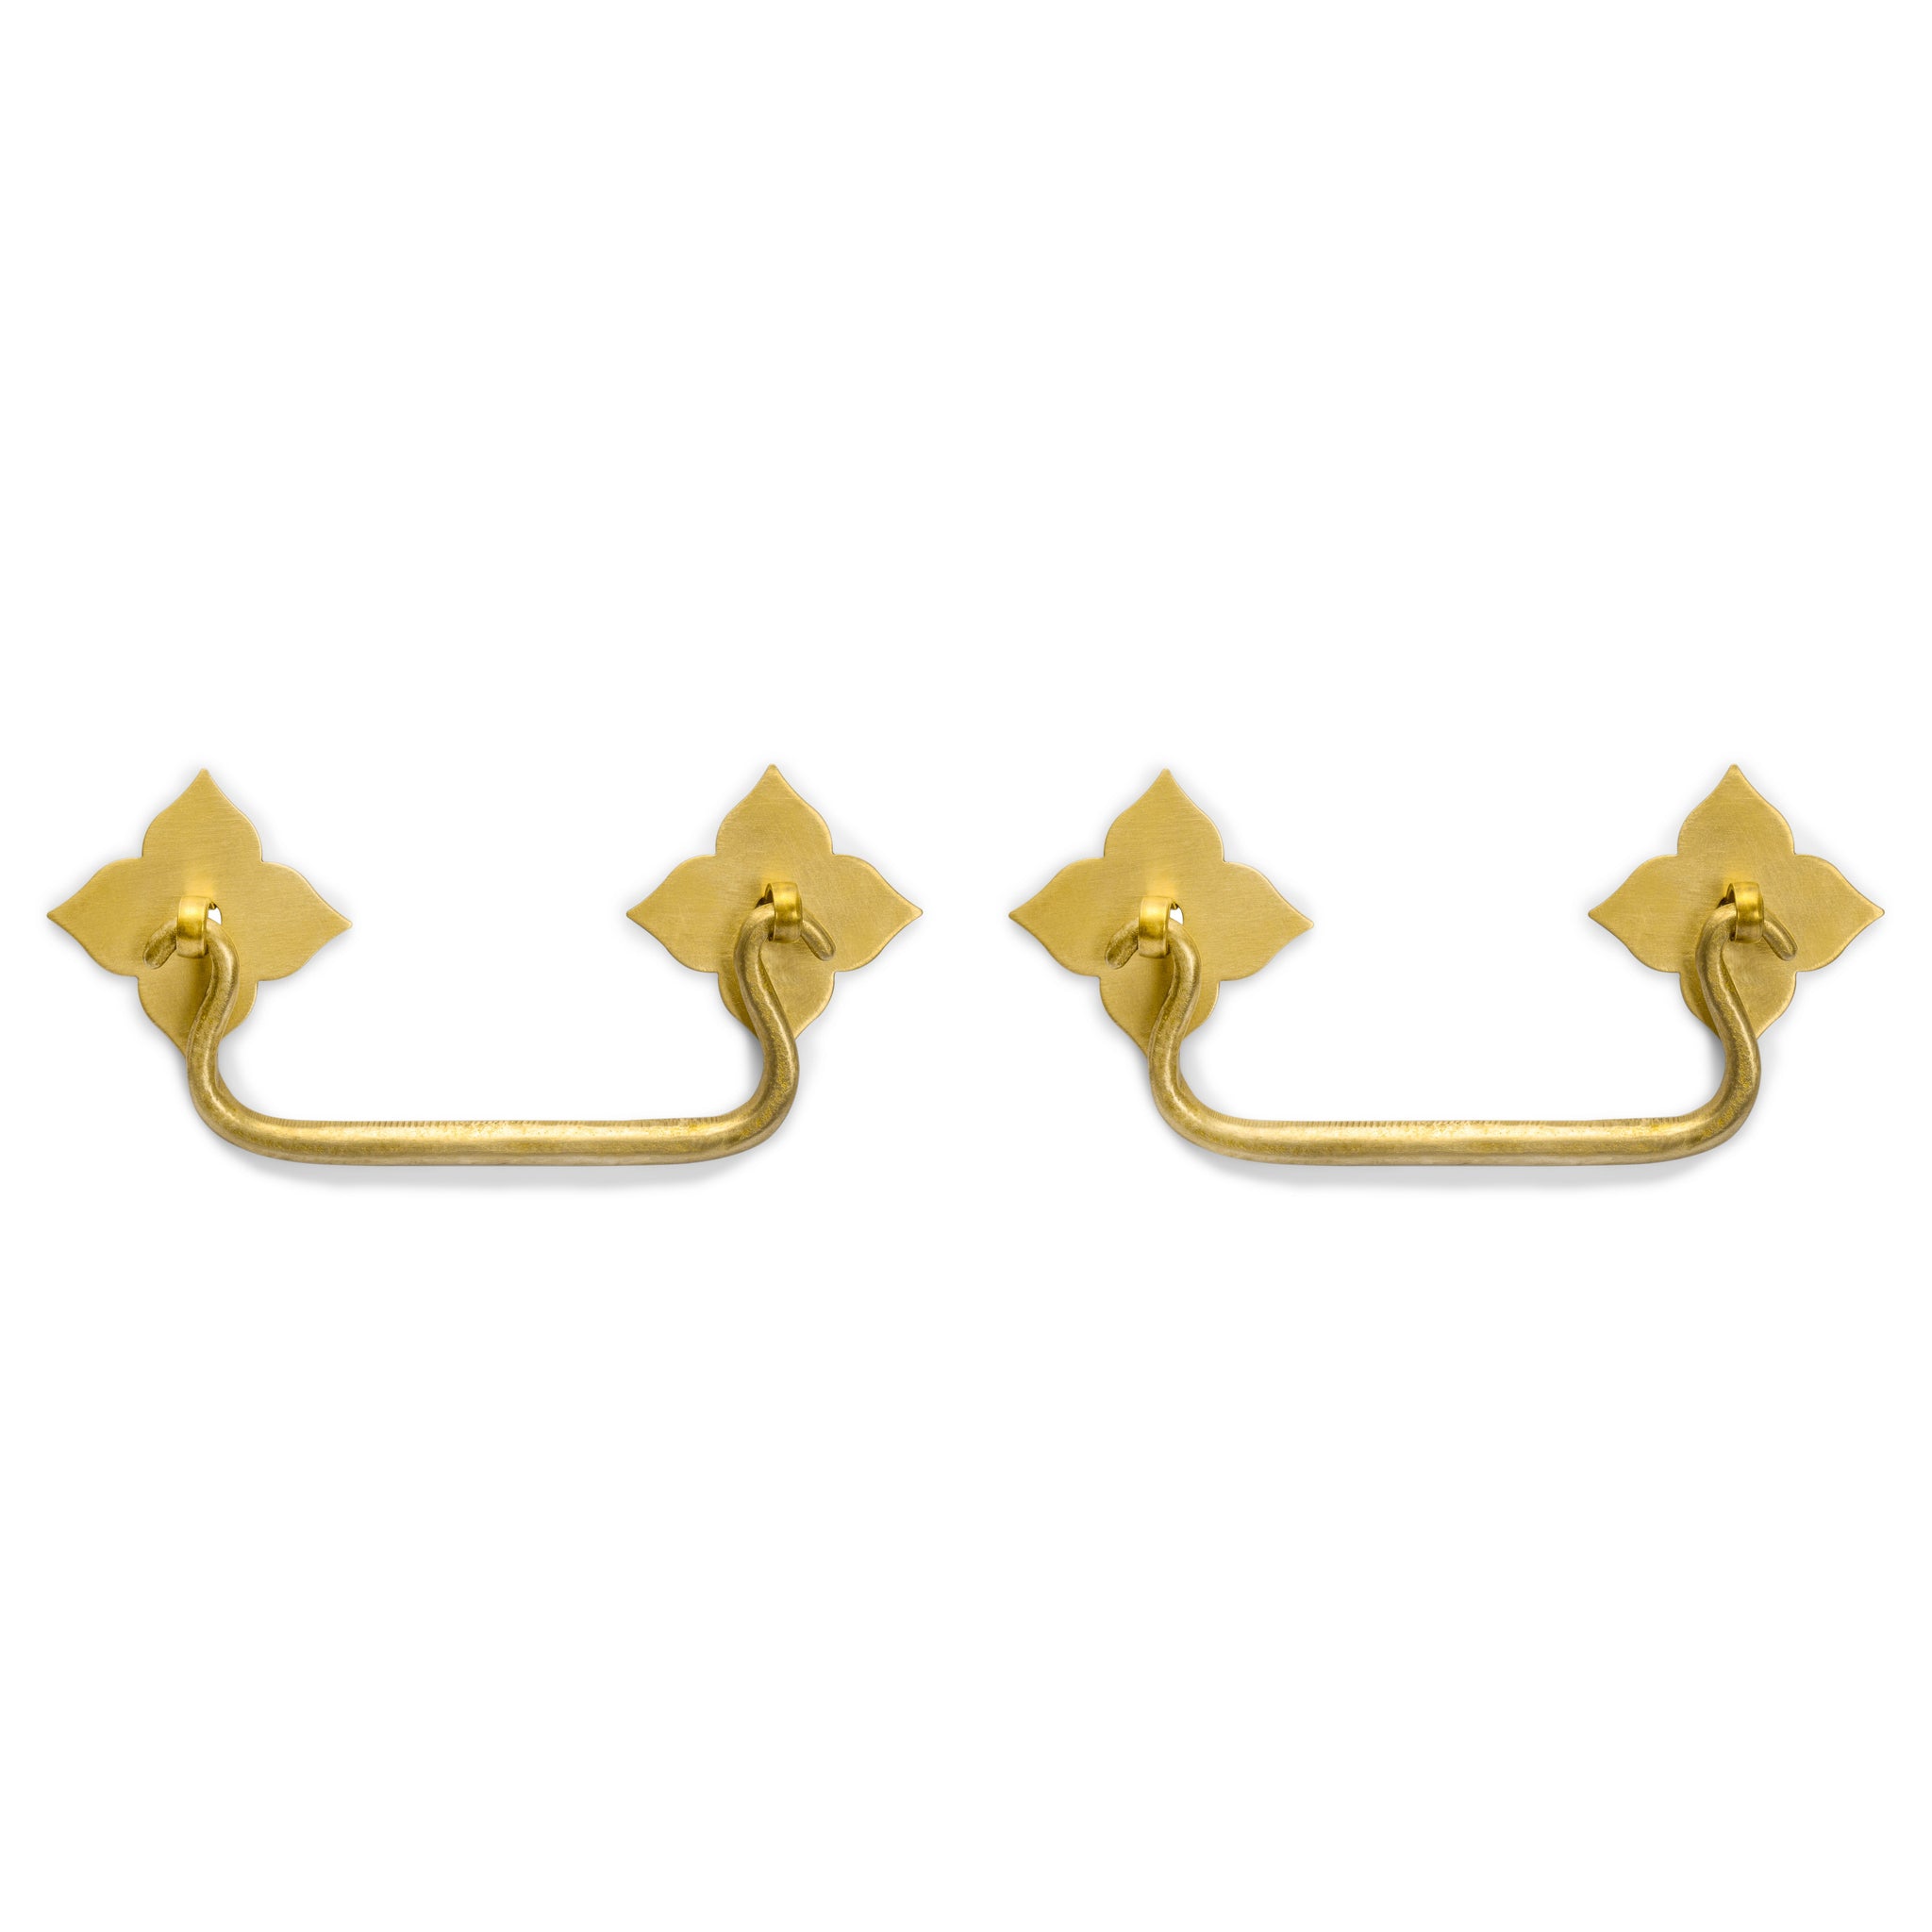 Bunchberry Pulls 3.2" - Set of 2-Chinese Brass Hardware